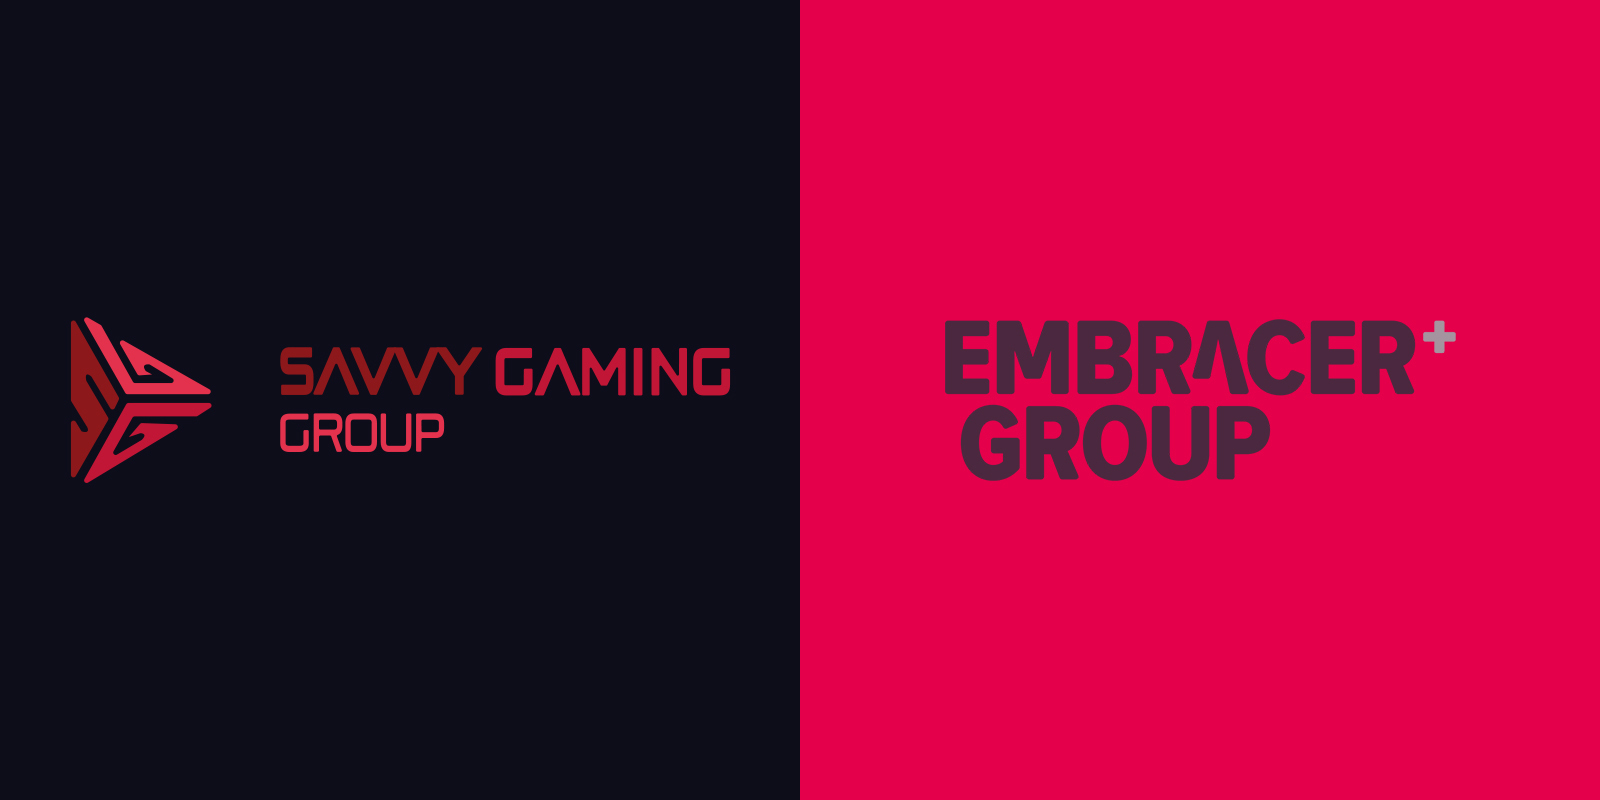 Saudi-backed savvy gaming group purchased $1 billion worth of shares in embracer group